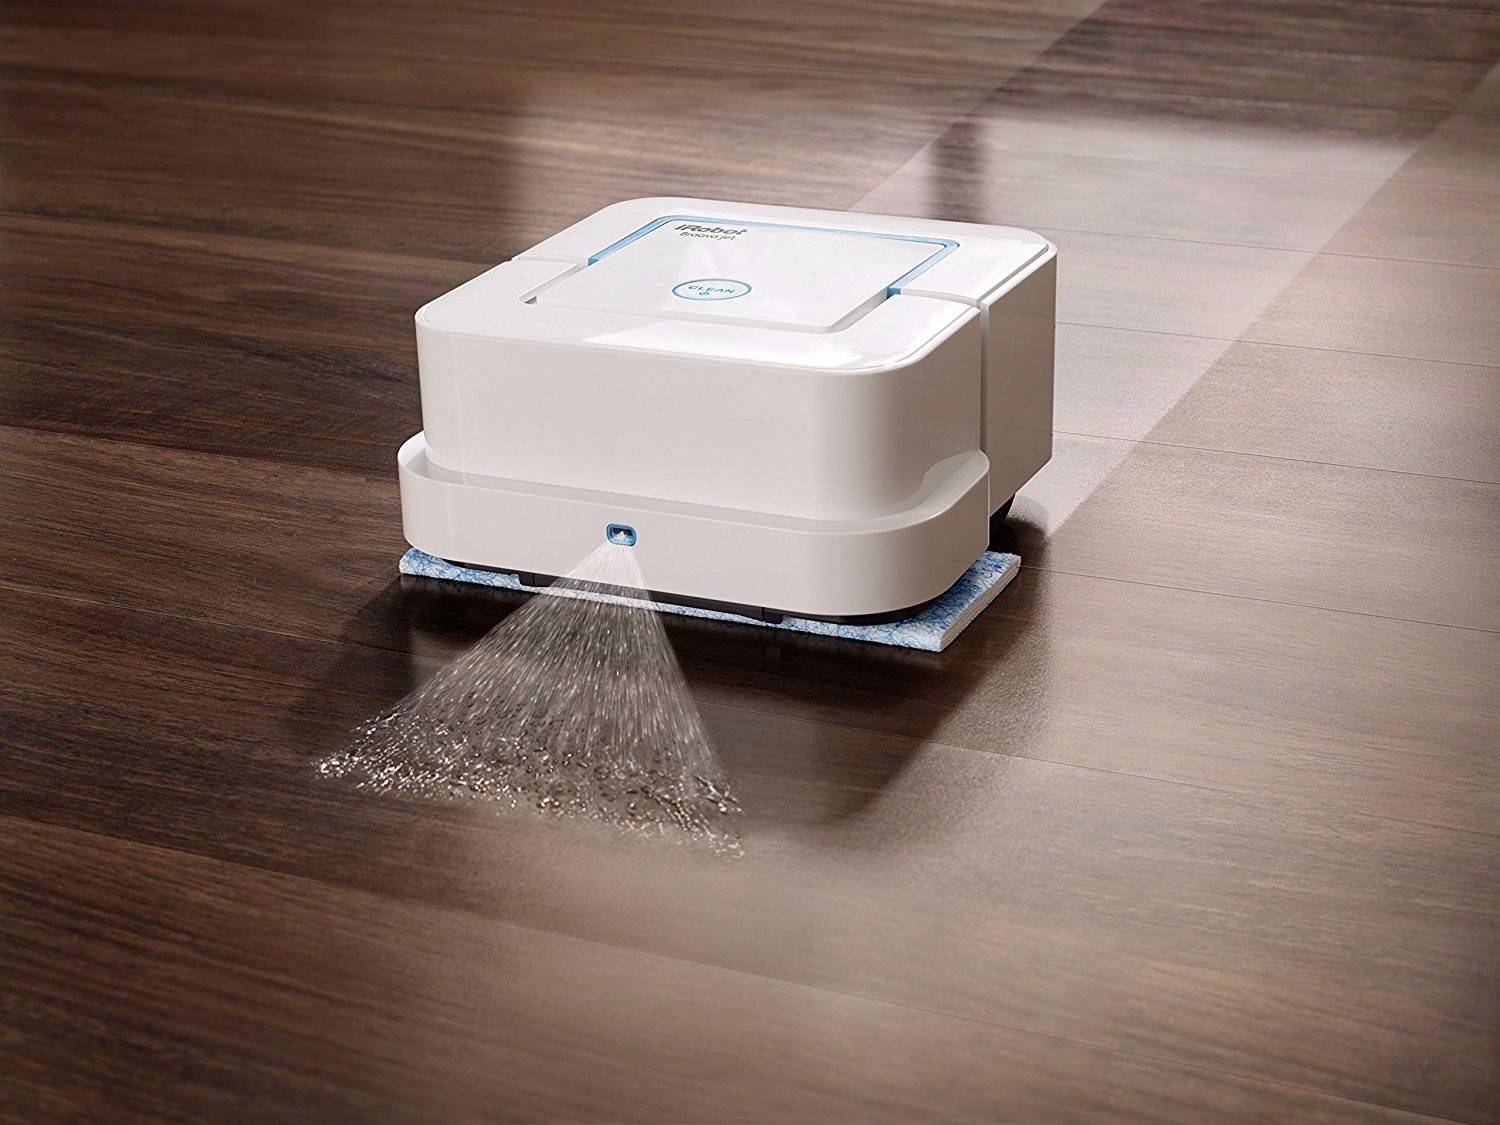 17 Wonderful Best Hardwood Floor Steamer 2024 free download best hardwood floor steamer of 12 smart home gadgets that practically clean the house for you pertaining to irobot braava